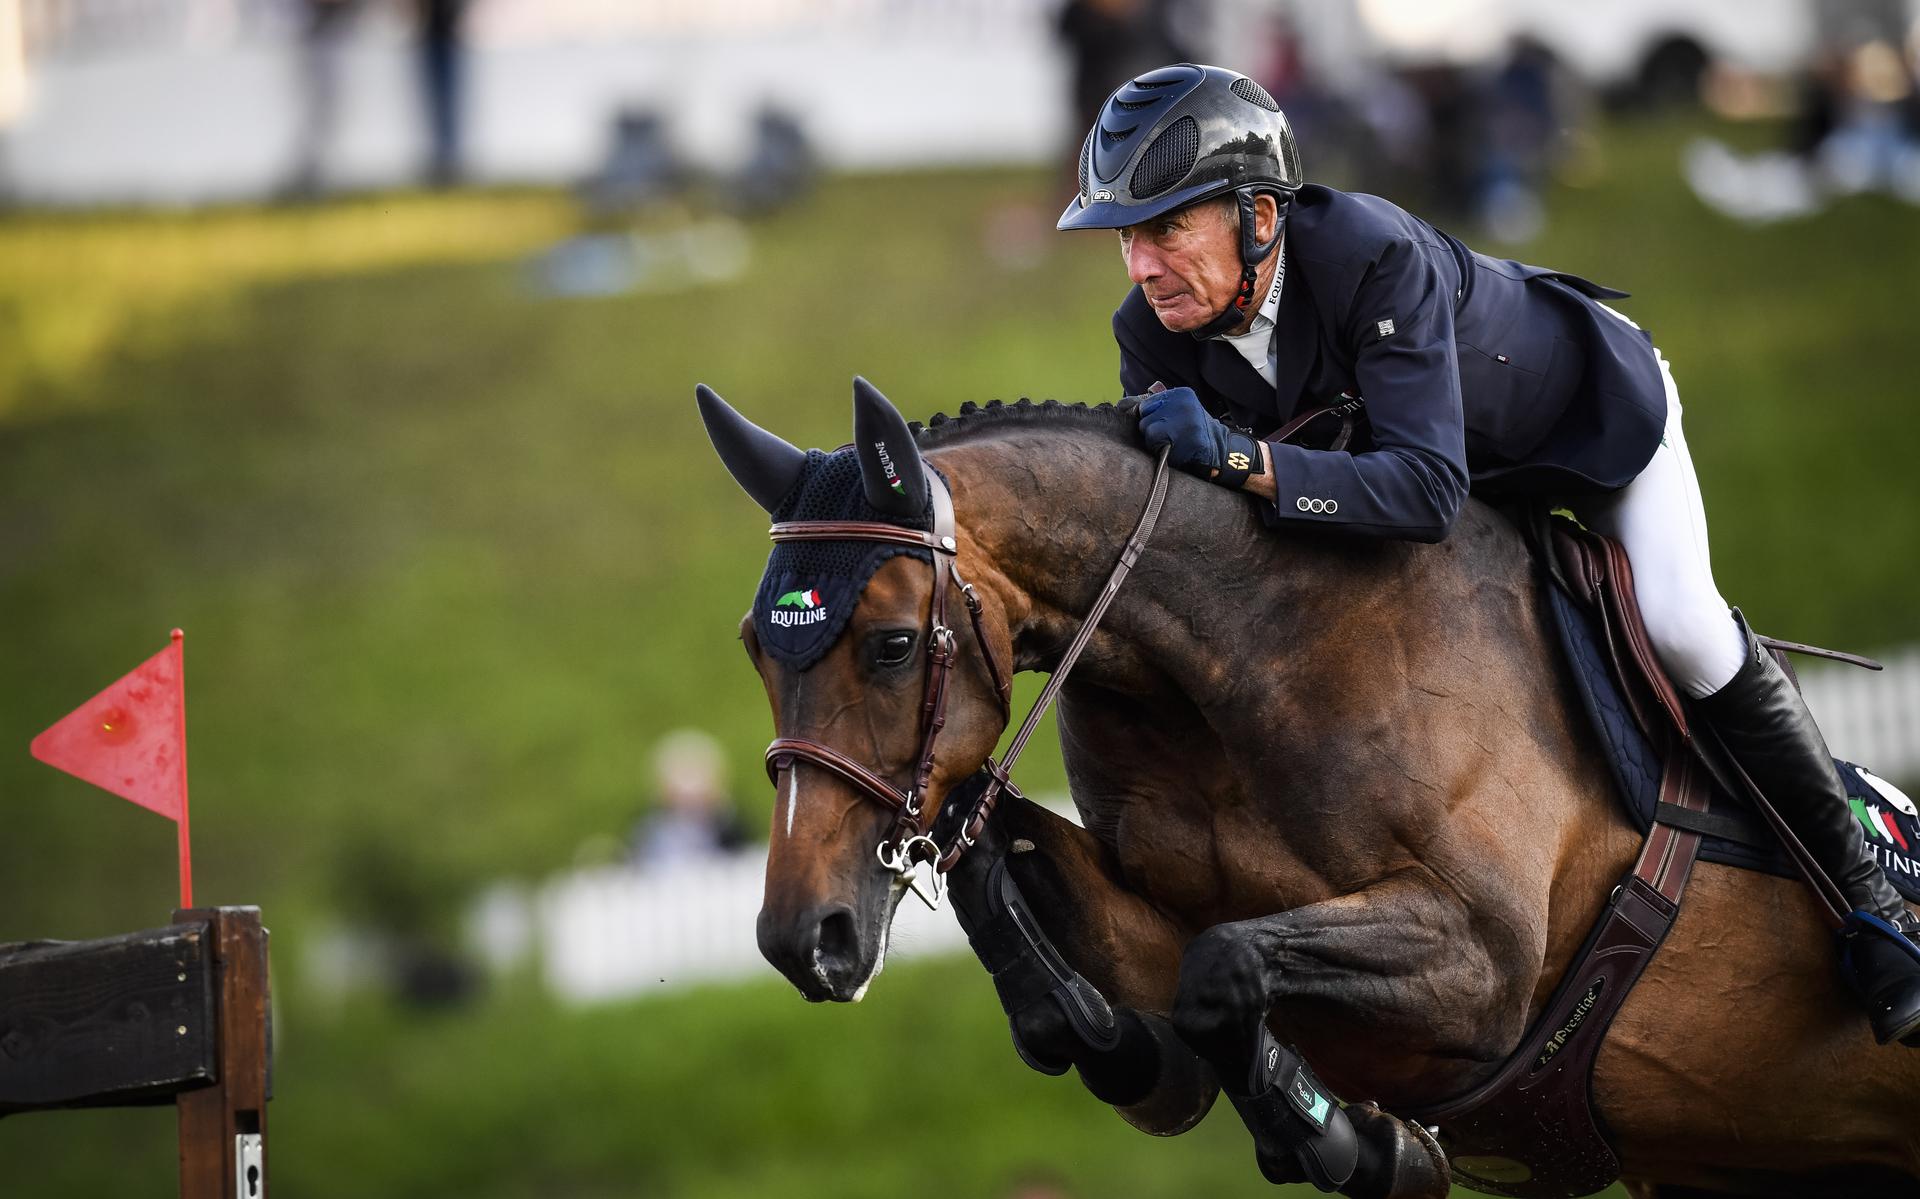 CSIO Youth in Veeningen: a breeding ground for show jumping with 350 riders from twenty countries